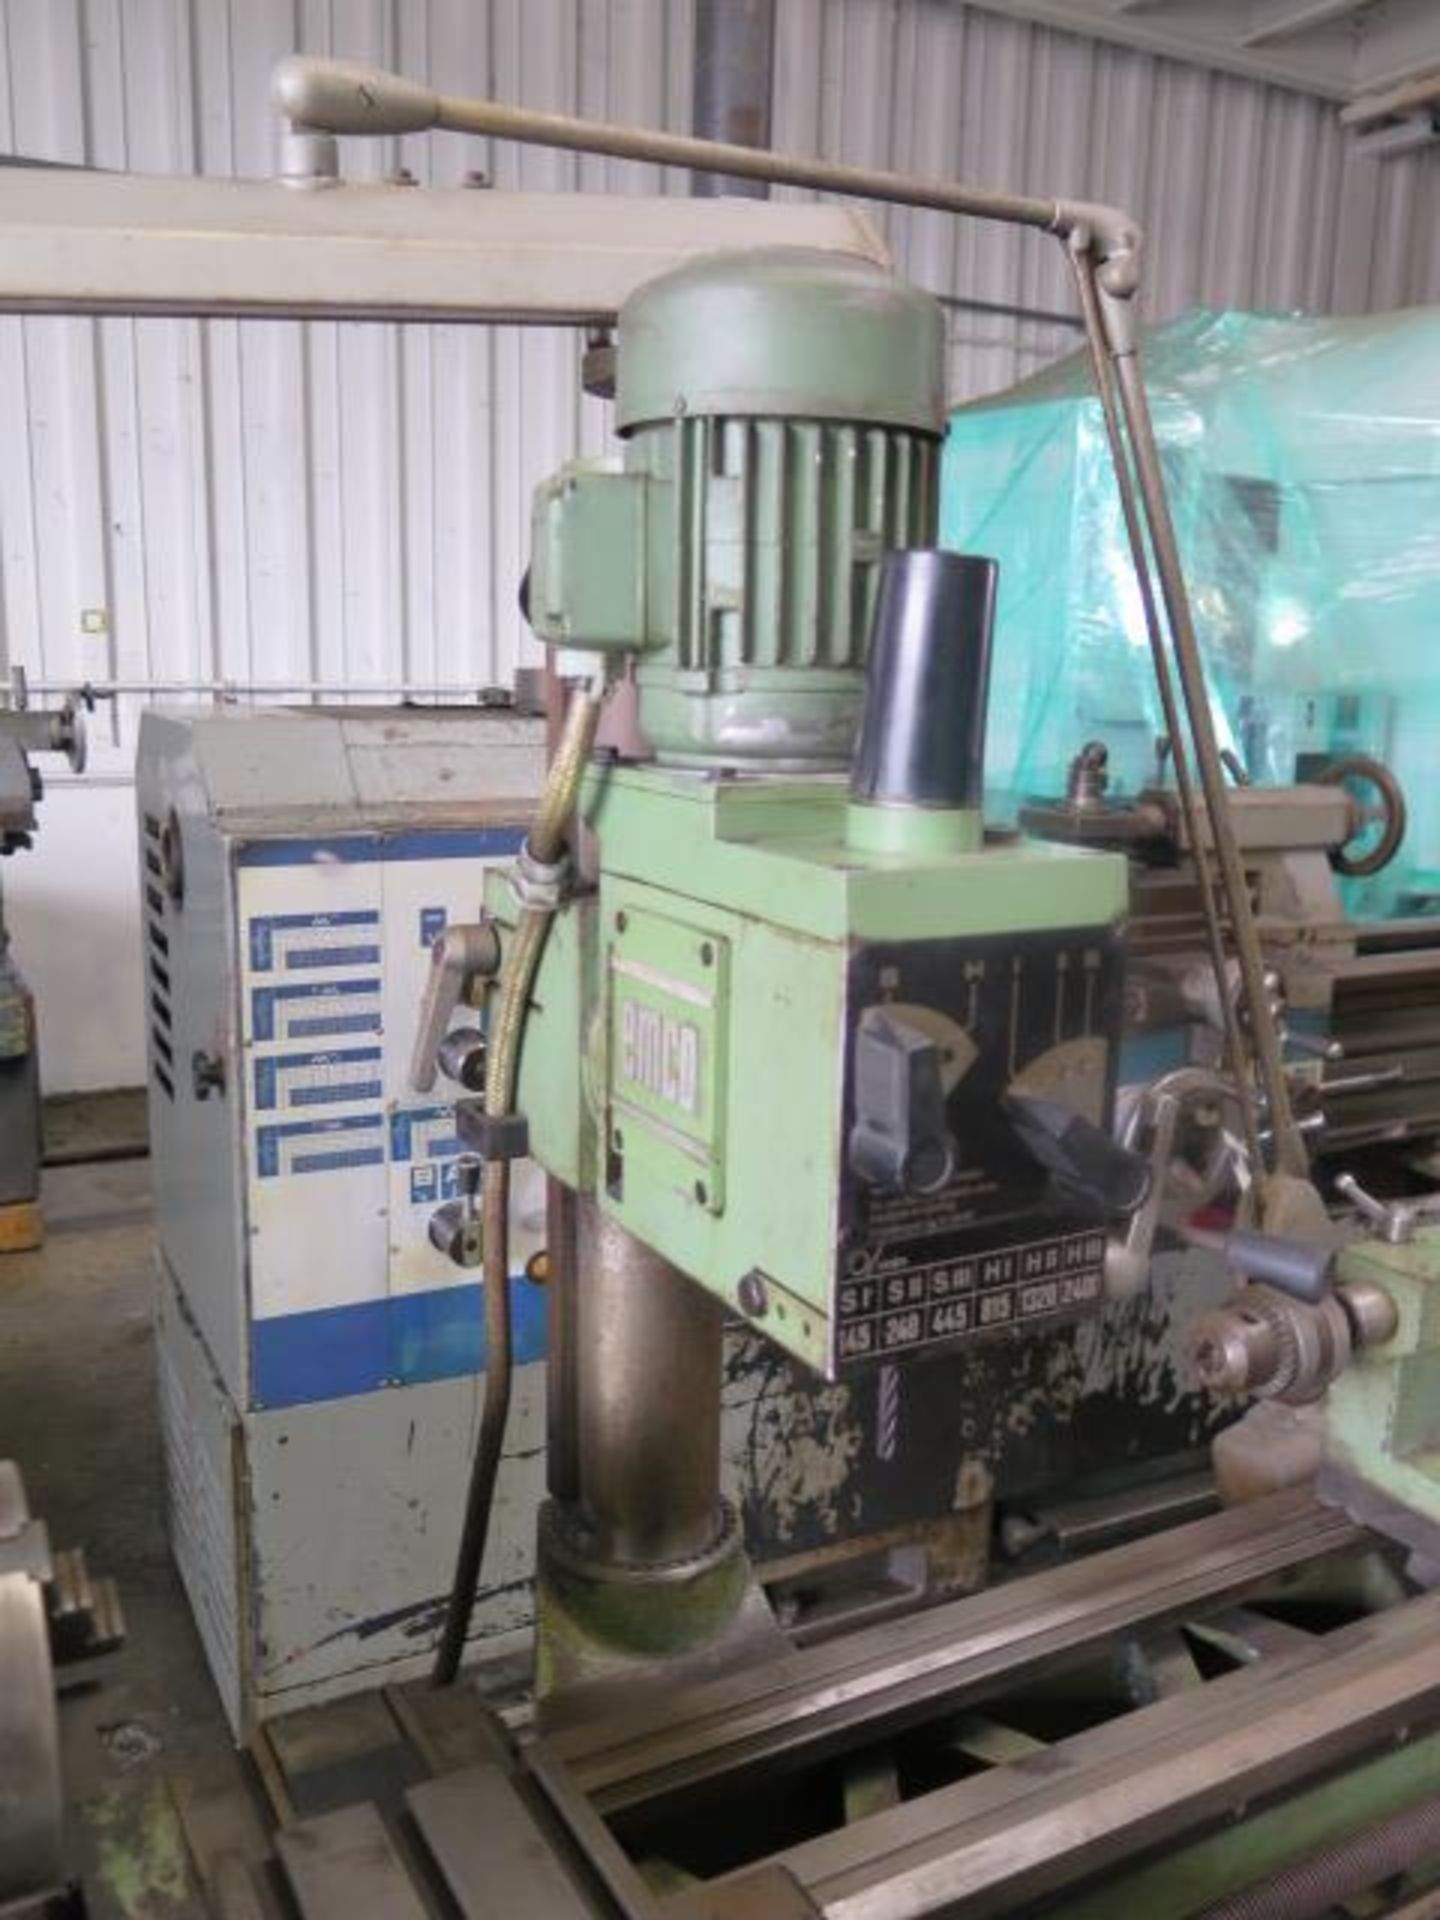 Emco “Maximat Mentor 10” Mill / Drill Machine w/ 60-2500 RPM (SOLD AS-IS - NO WARRANTY) - Image 11 of 16